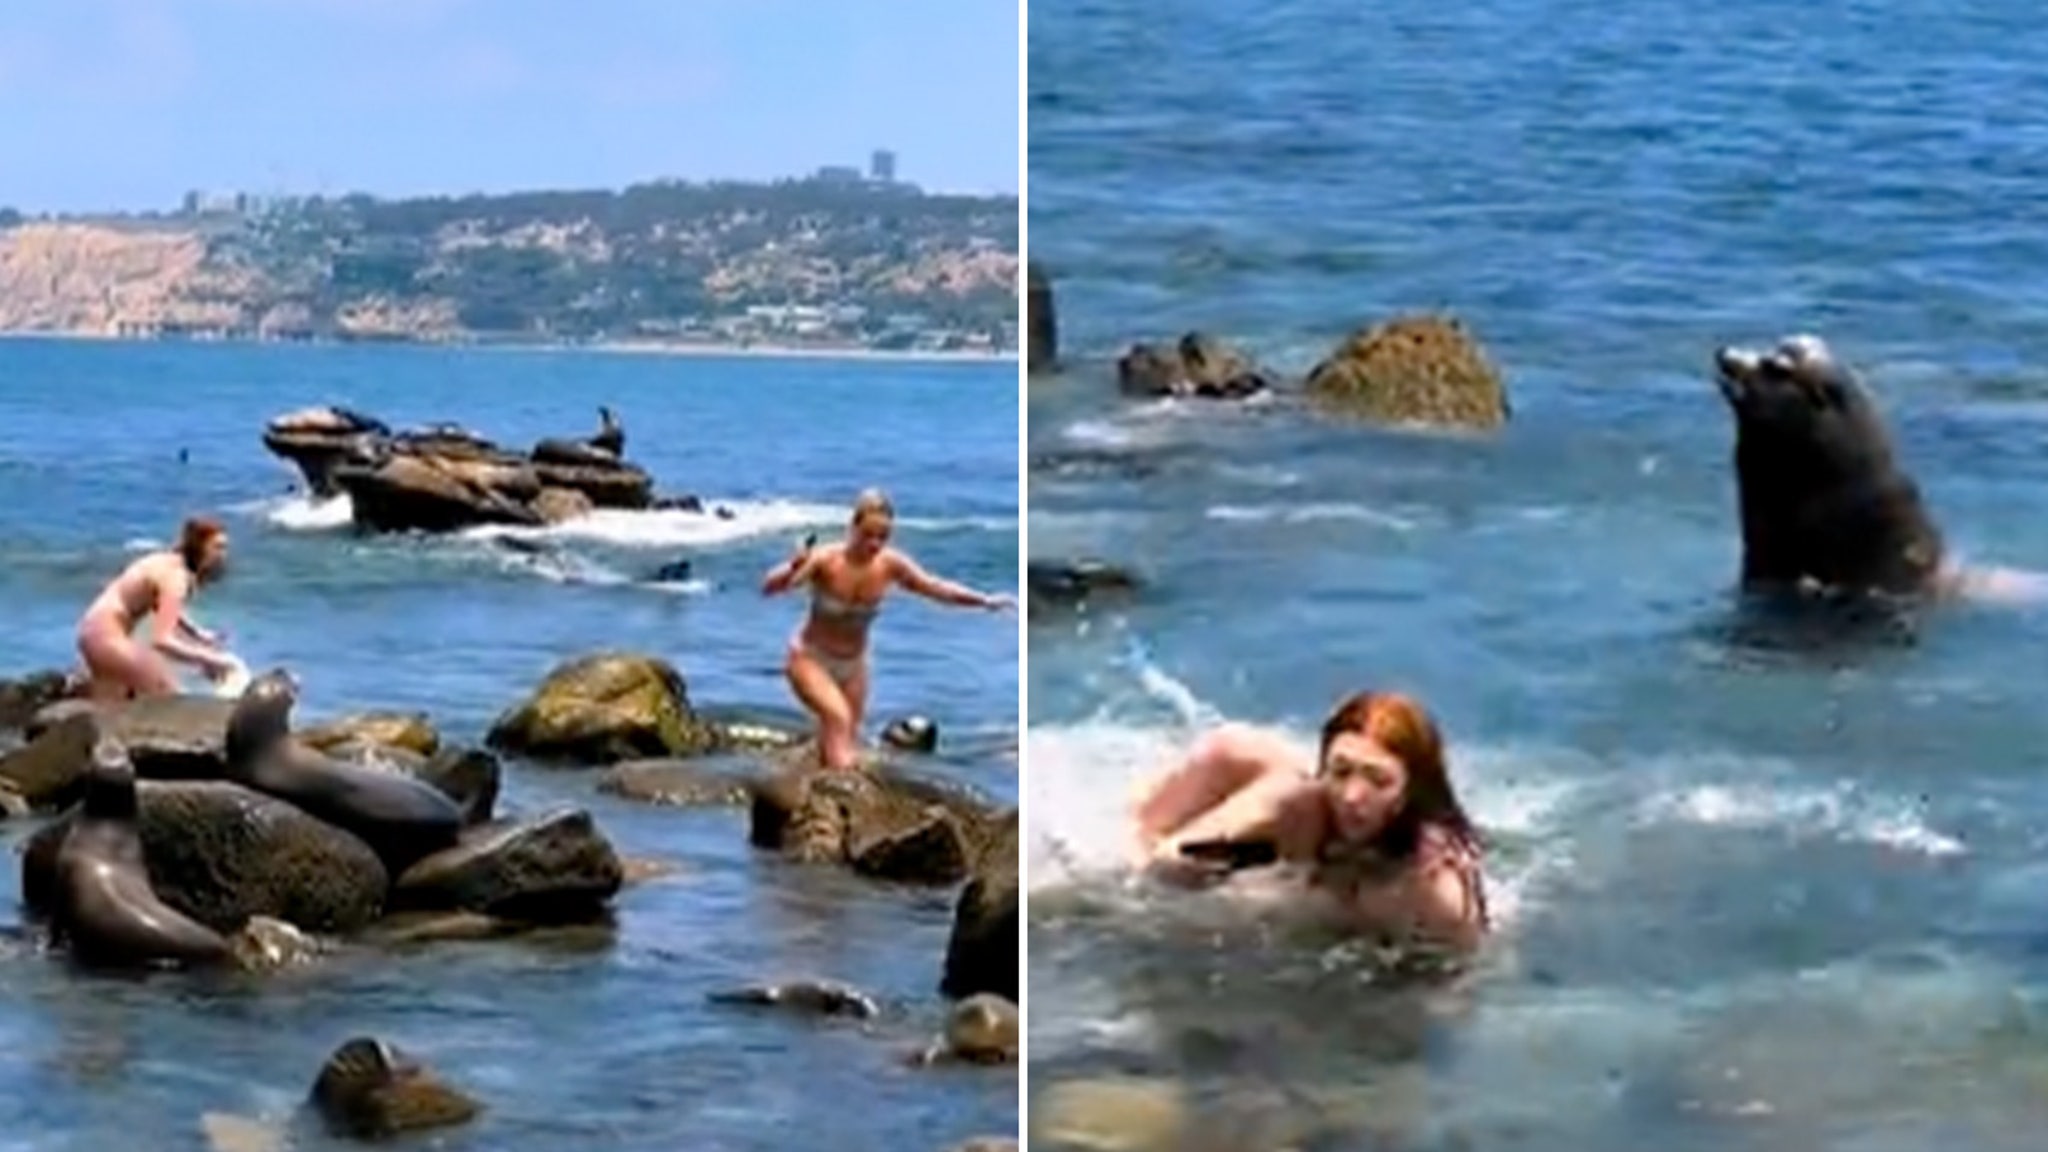 Girls Chased by Sea Lions in La Jolla After Getting Too Close